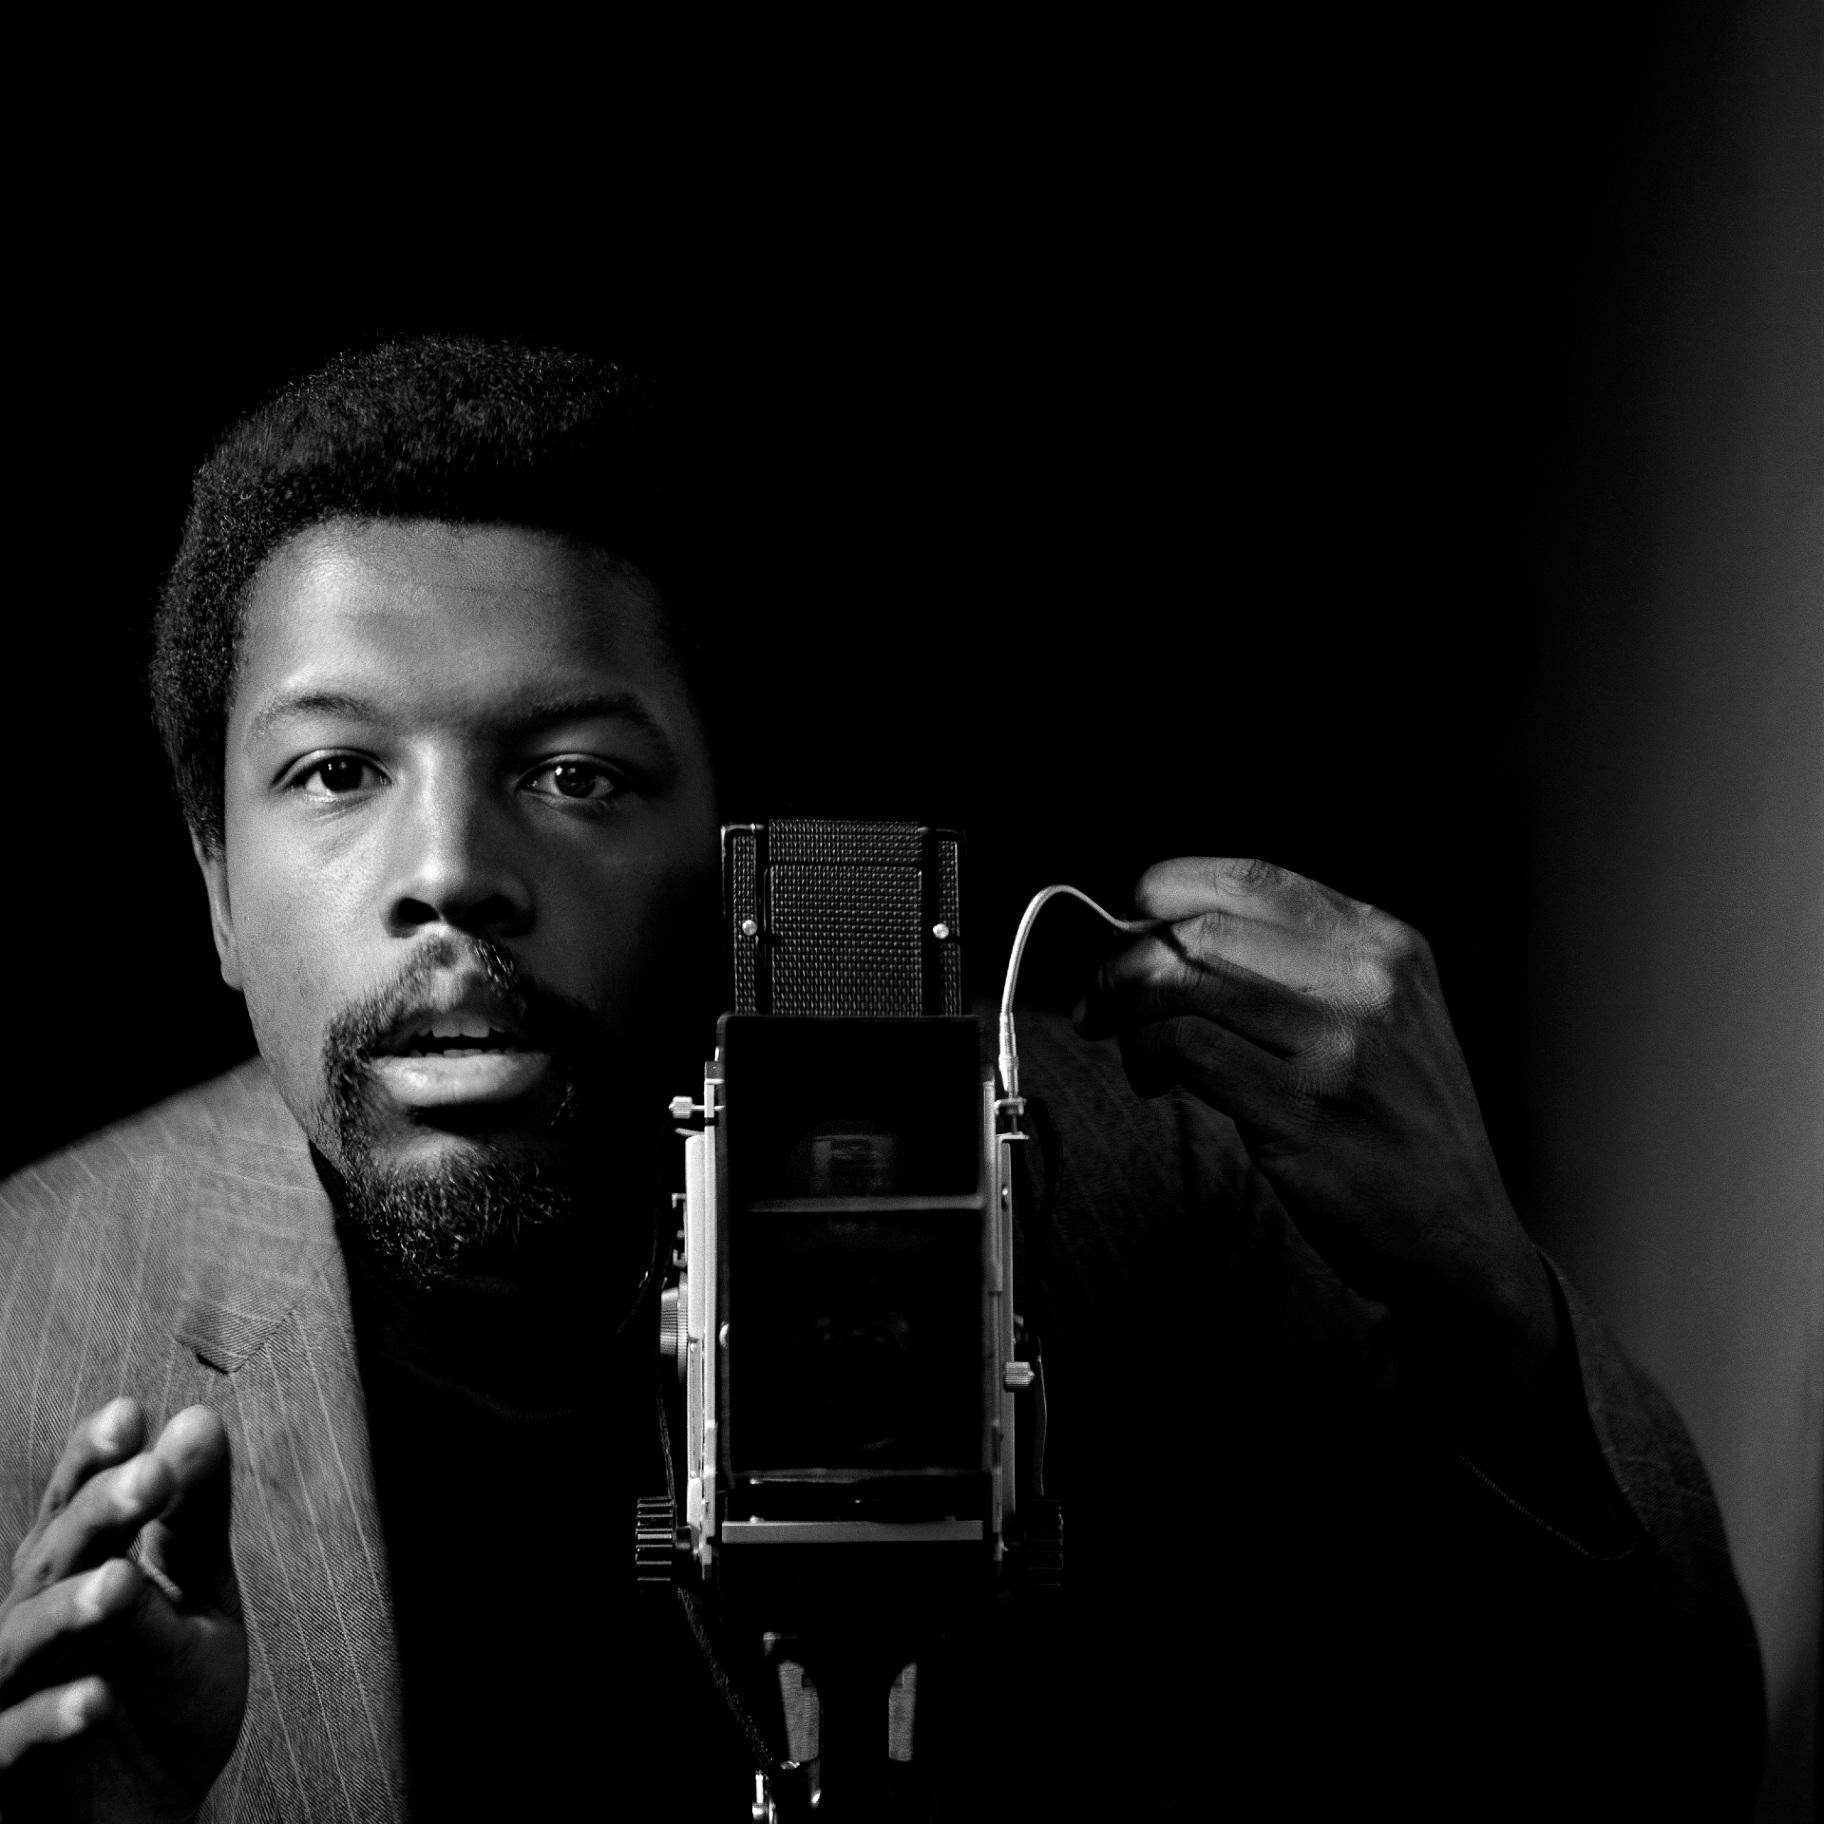 Kwame Brathwaite. Untitled (Self-Portrait Taken in AJAS Studio), about 1964. The Art Institute of Chicago, promised gift of Ralph and Nancy Segall. © The Kwame Brathwaite Archive